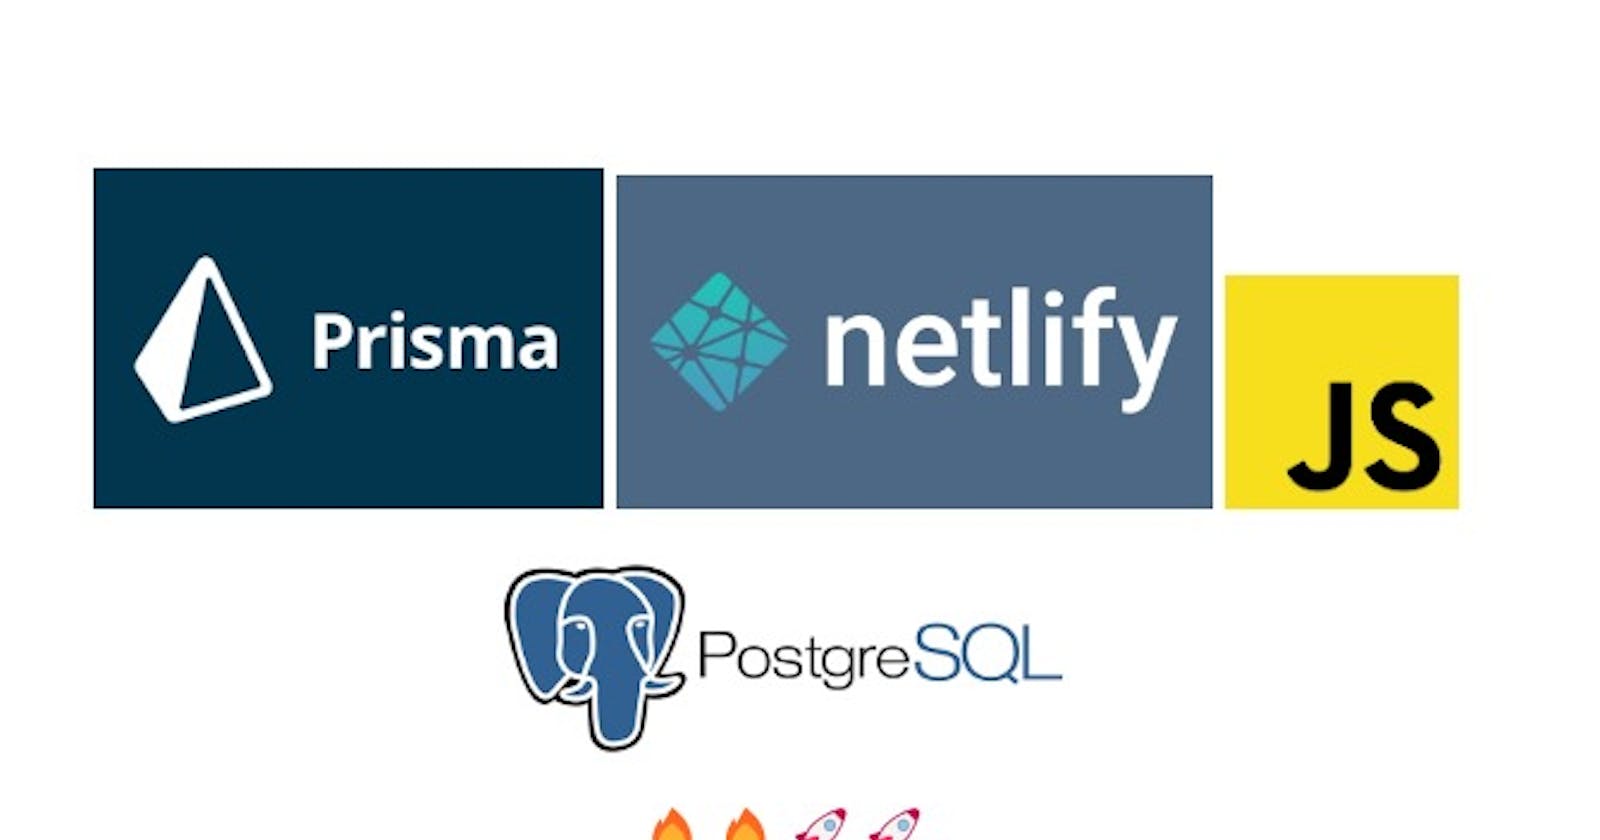 Building a Serverless CMS with Netlify Functions, Prisma, and PostgreSQL